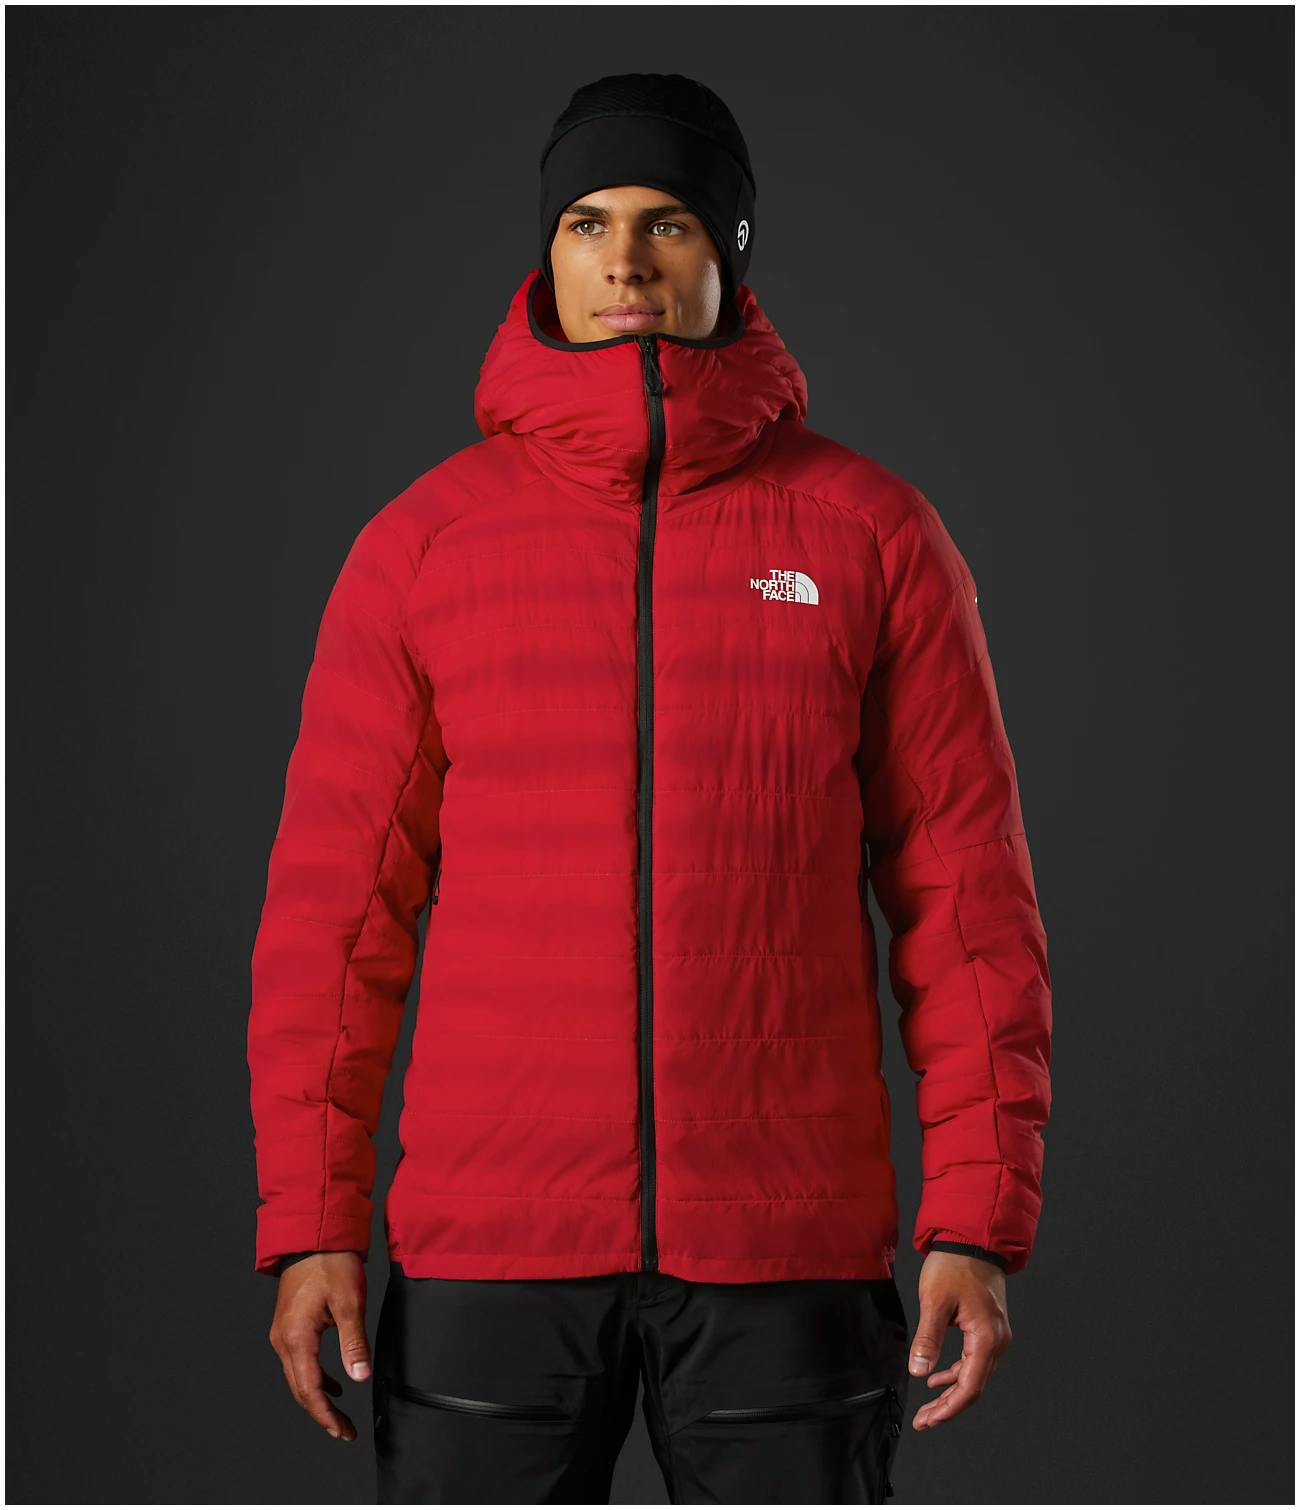 The North Face Men's Summit Breithorn 50/50 Insulated Hoodie